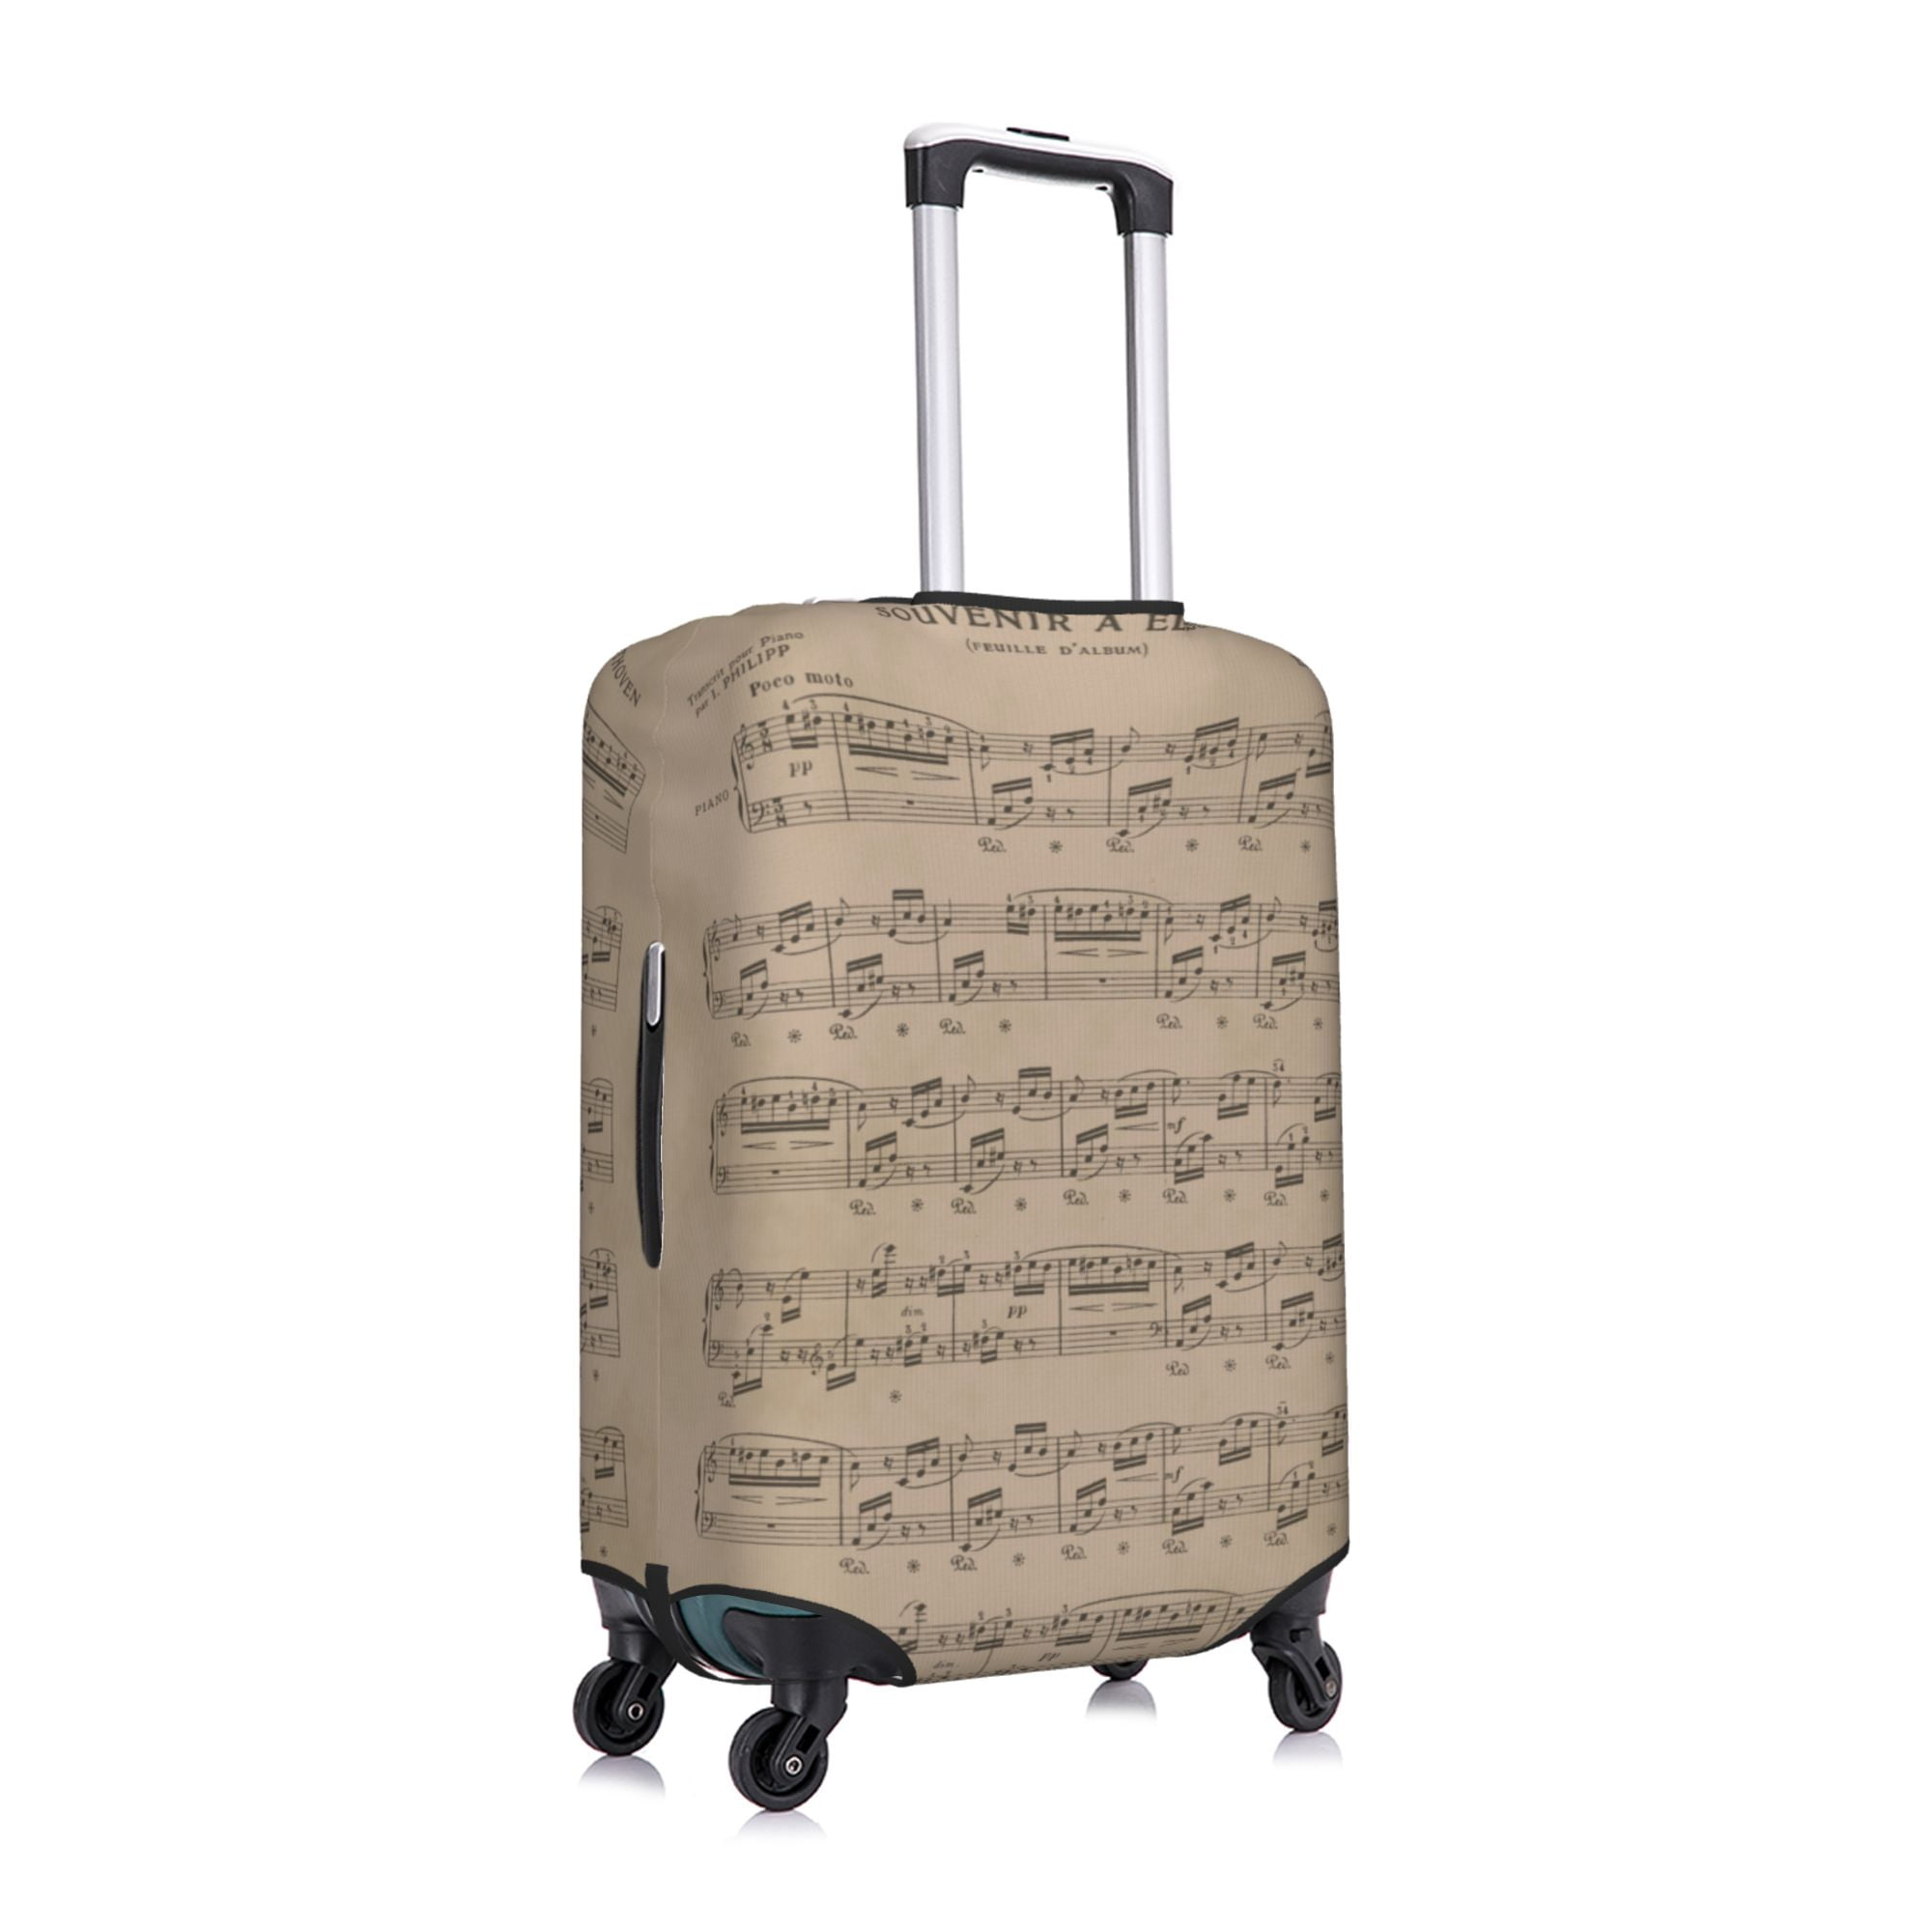 XMXY Travel Luggage Cover Protector, Classical Sheet Music Pattern Suitcase  Covers for Luggage, Large Size 